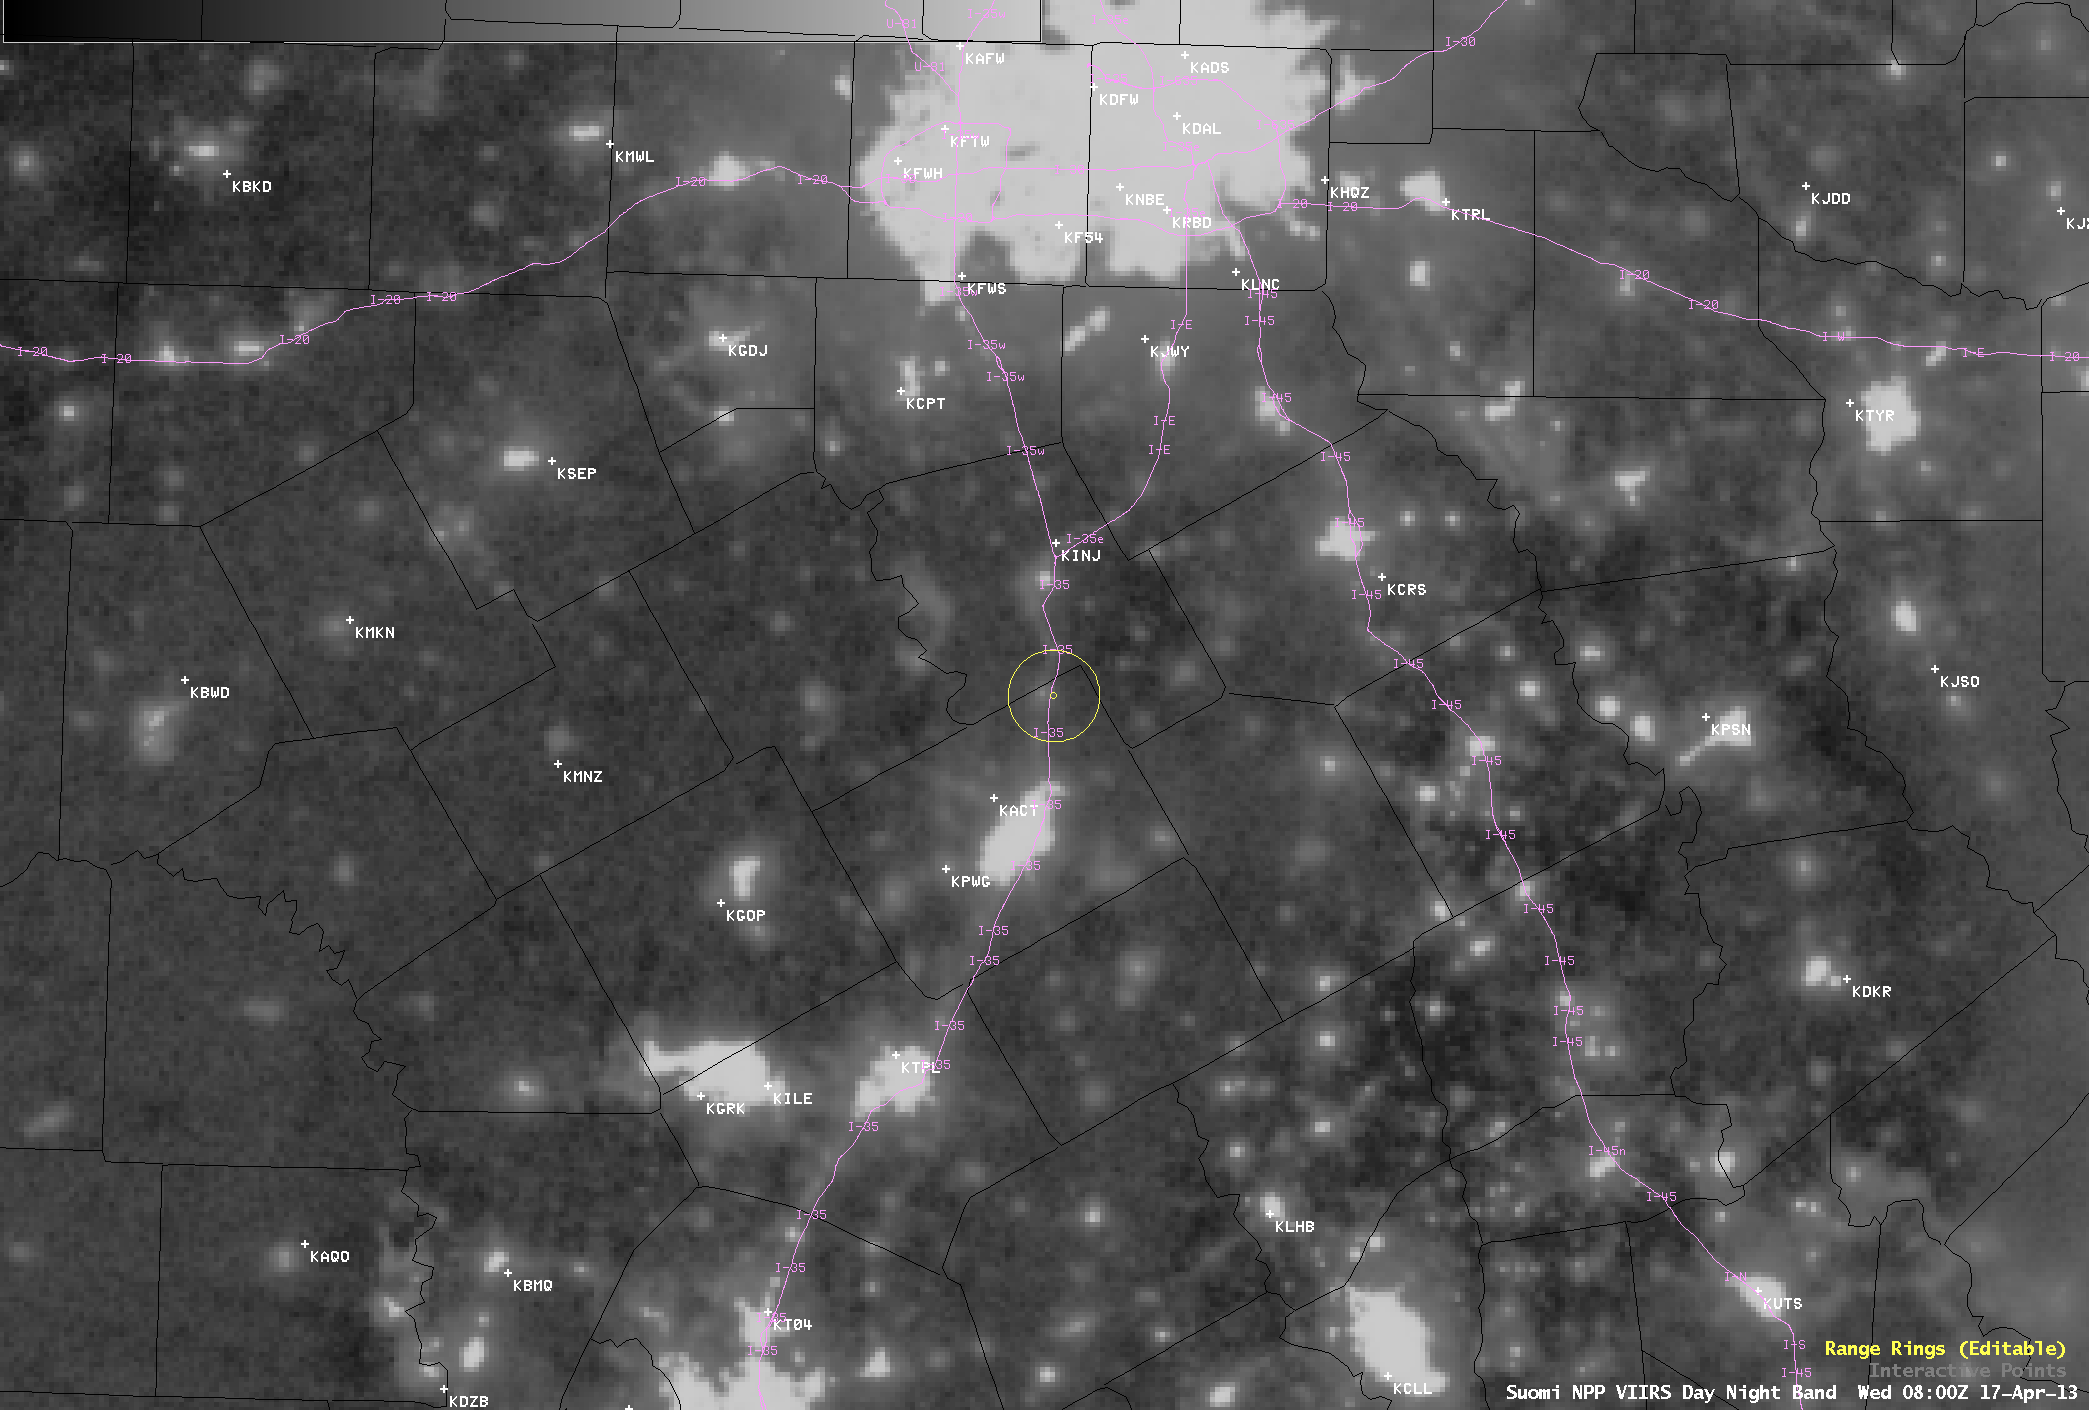 Night-time Suomi NPP VIIRS Day/Night Band images on 17 April and 18 April